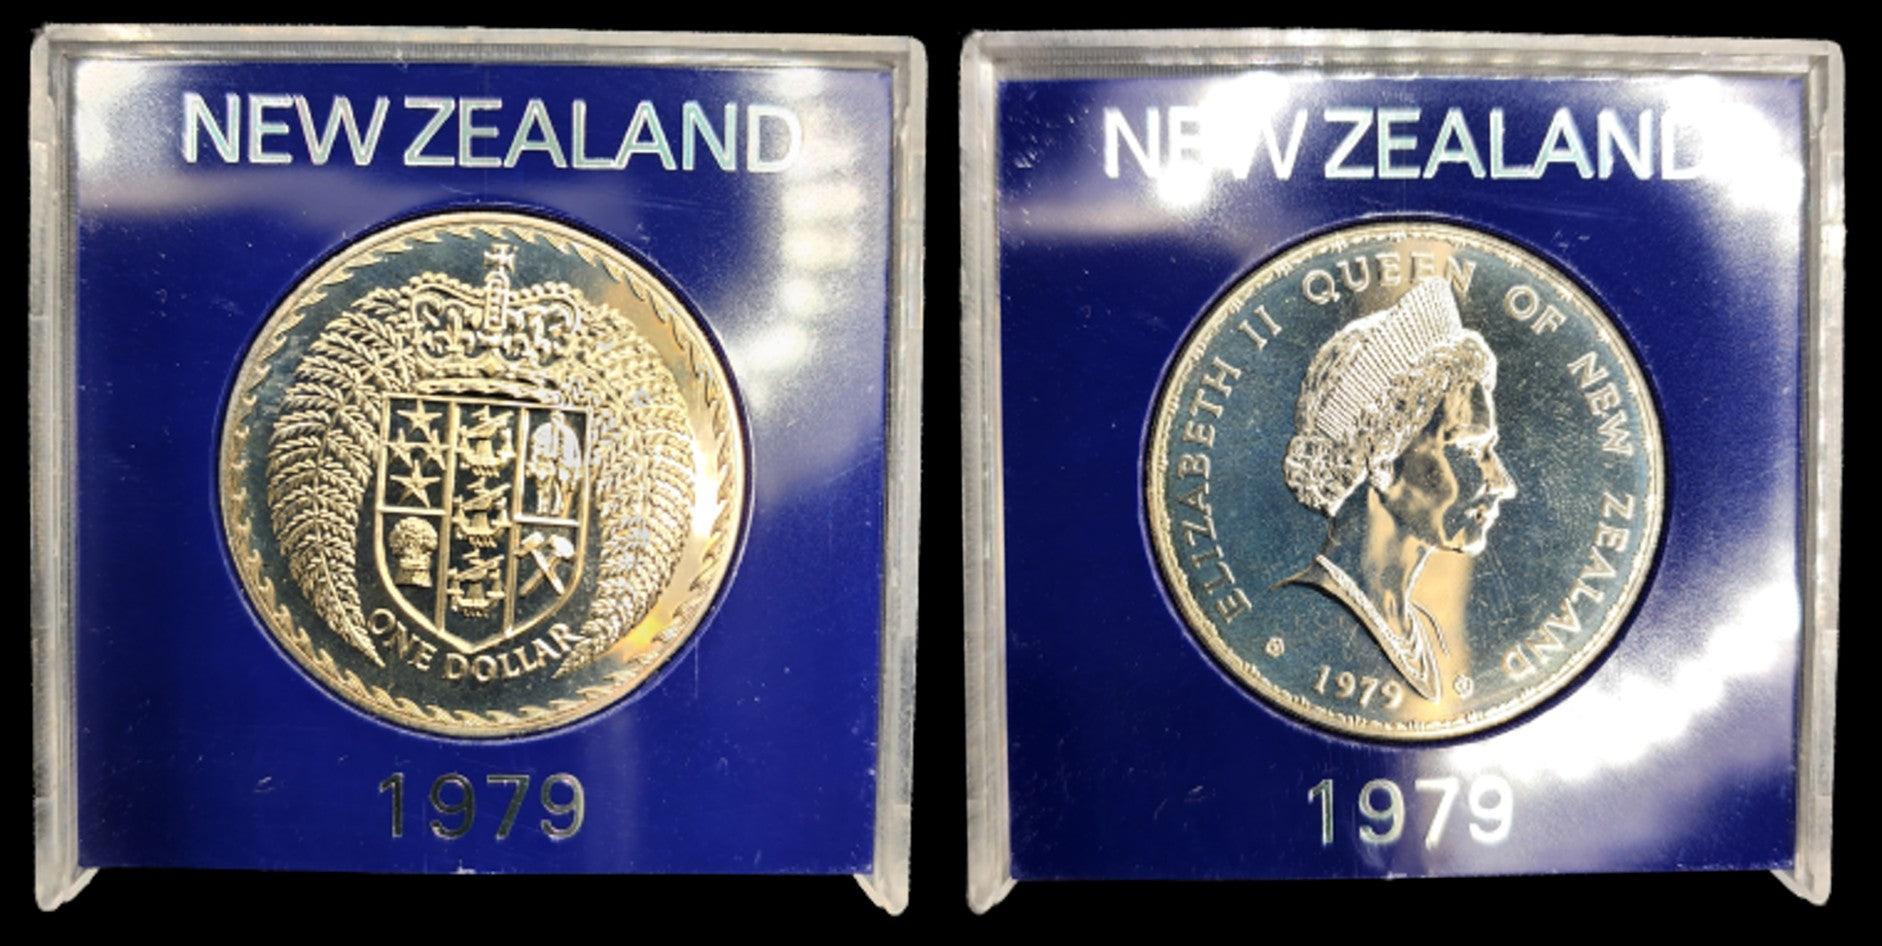 1979 New Zealand One Dollar Coin - Shield of Arms Series - Berry Portrait First Year - Loose Change Coins